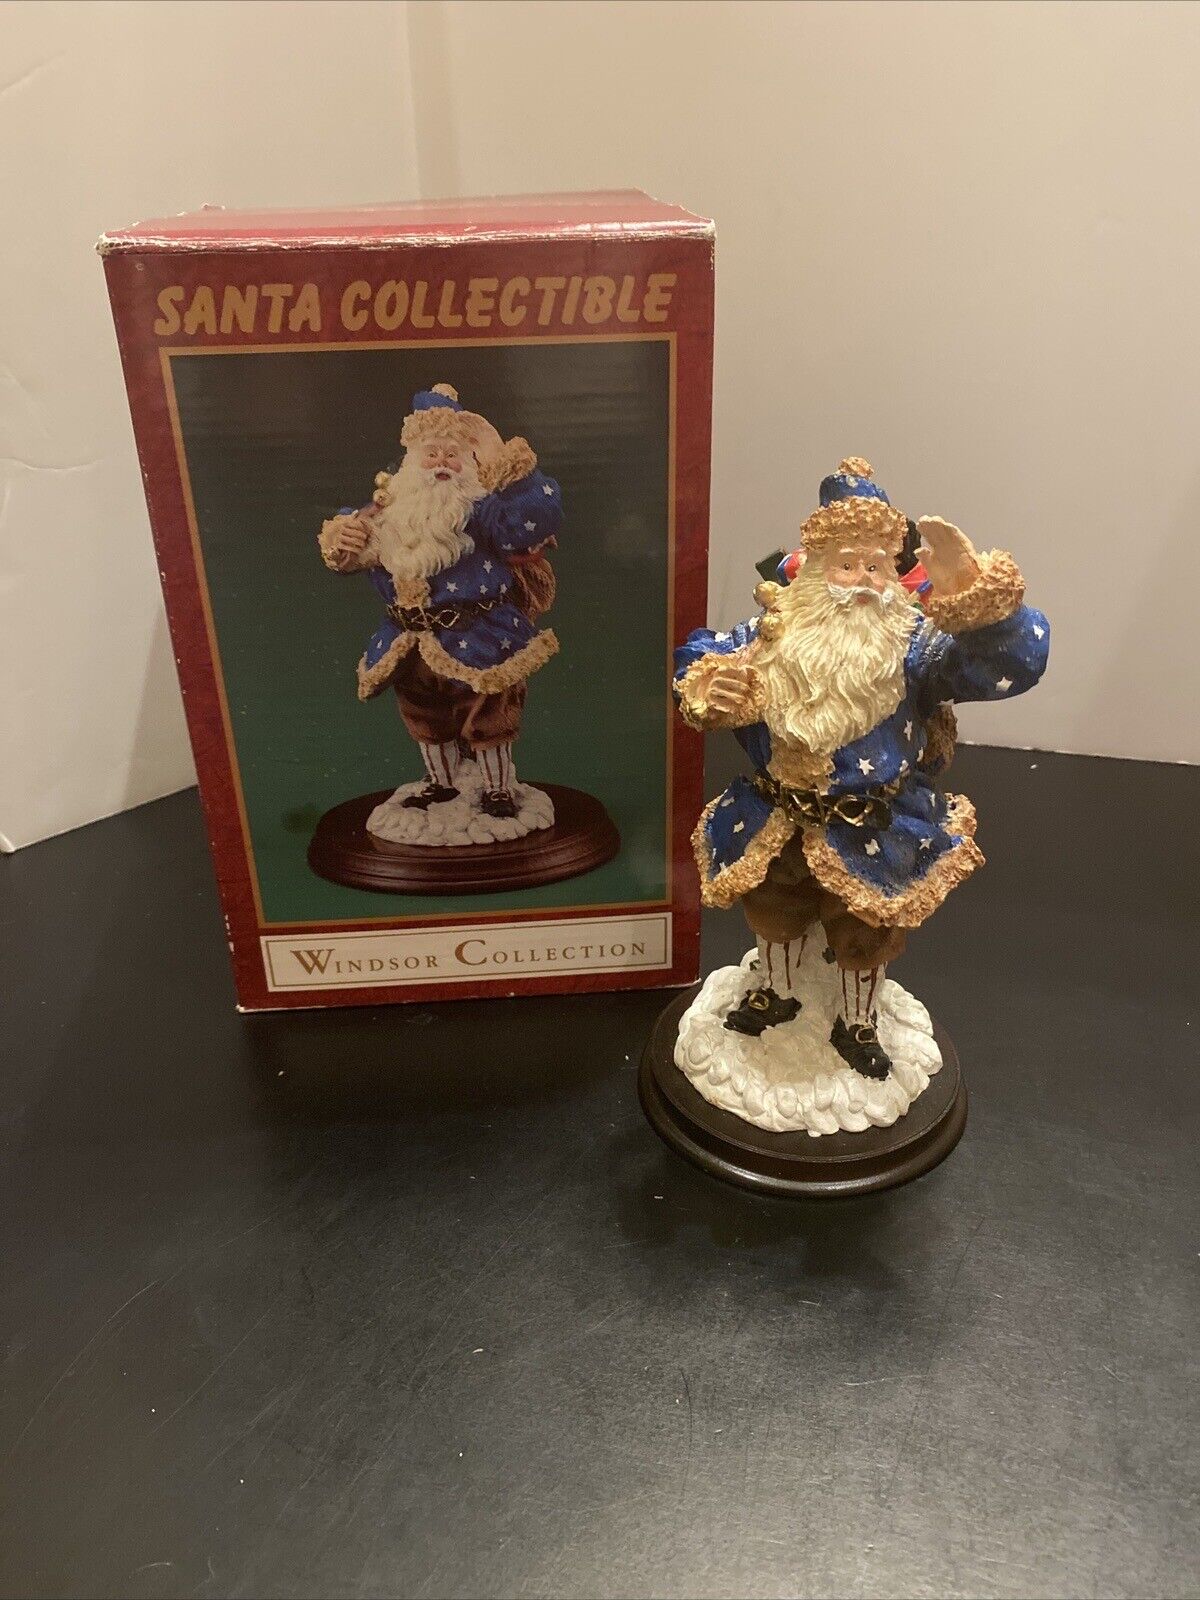 Windsor Collection Patriotic Old World Santa Collectible 8” Christmas Figure